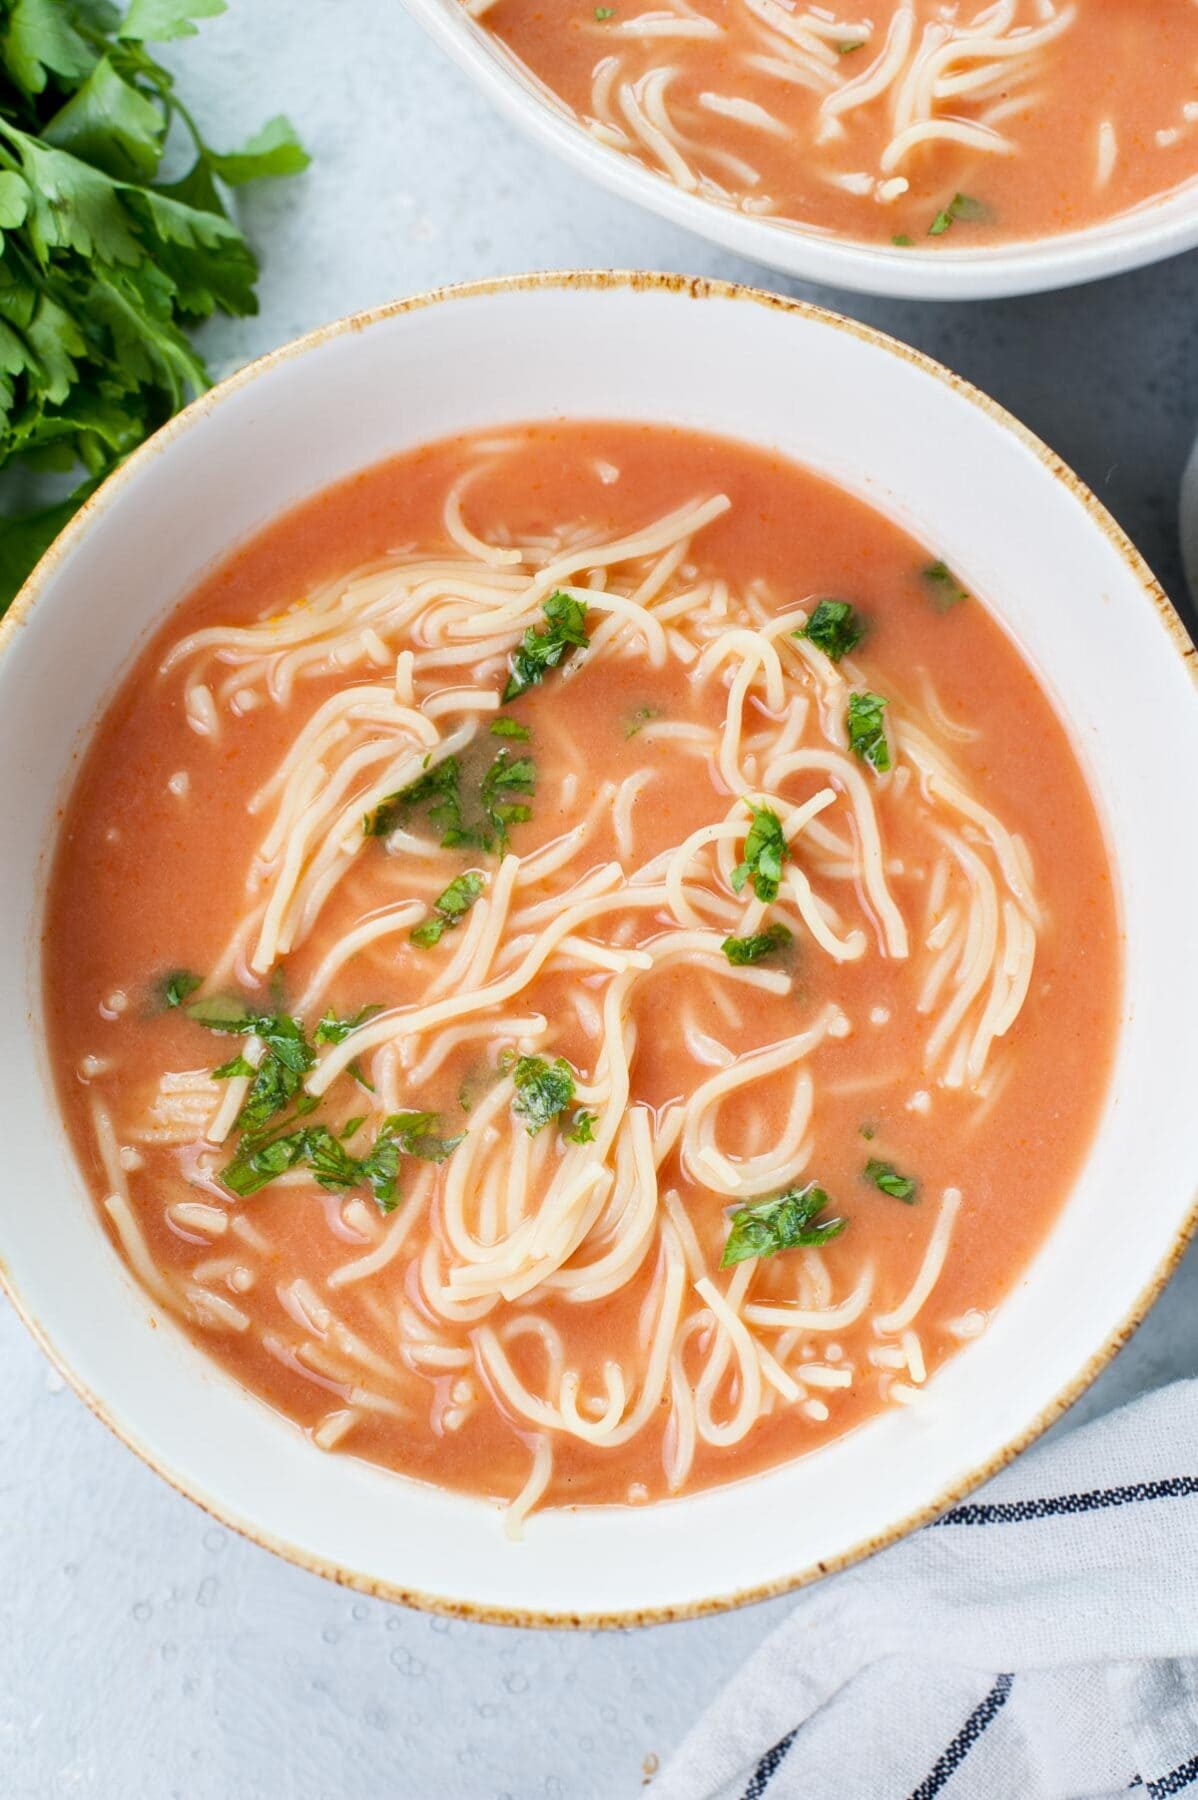 Polish tomato soup in a white plate served with noodles and chopped parsley.